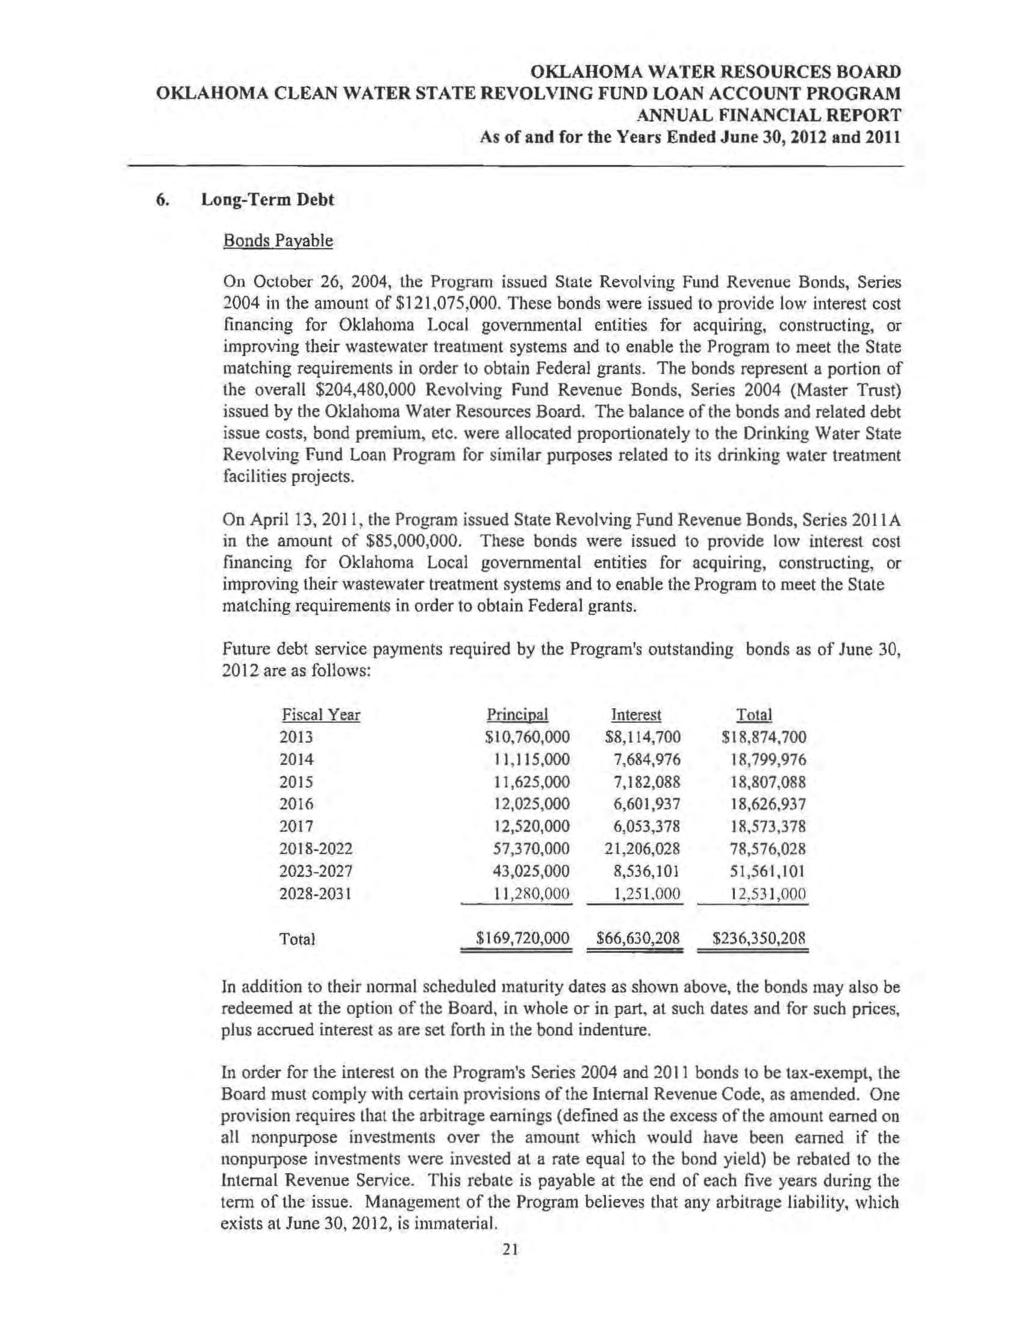 OKLAHOMA WATER RESOURCES BOARD OKLAHOMA CLEAN WATER STATE REVOLVING FUND LOAN ACCOUNT PROGRAM ANNUAL FINANCIAL REPORT As of and for the Years Ended June 30, 2012 and 2011 6.